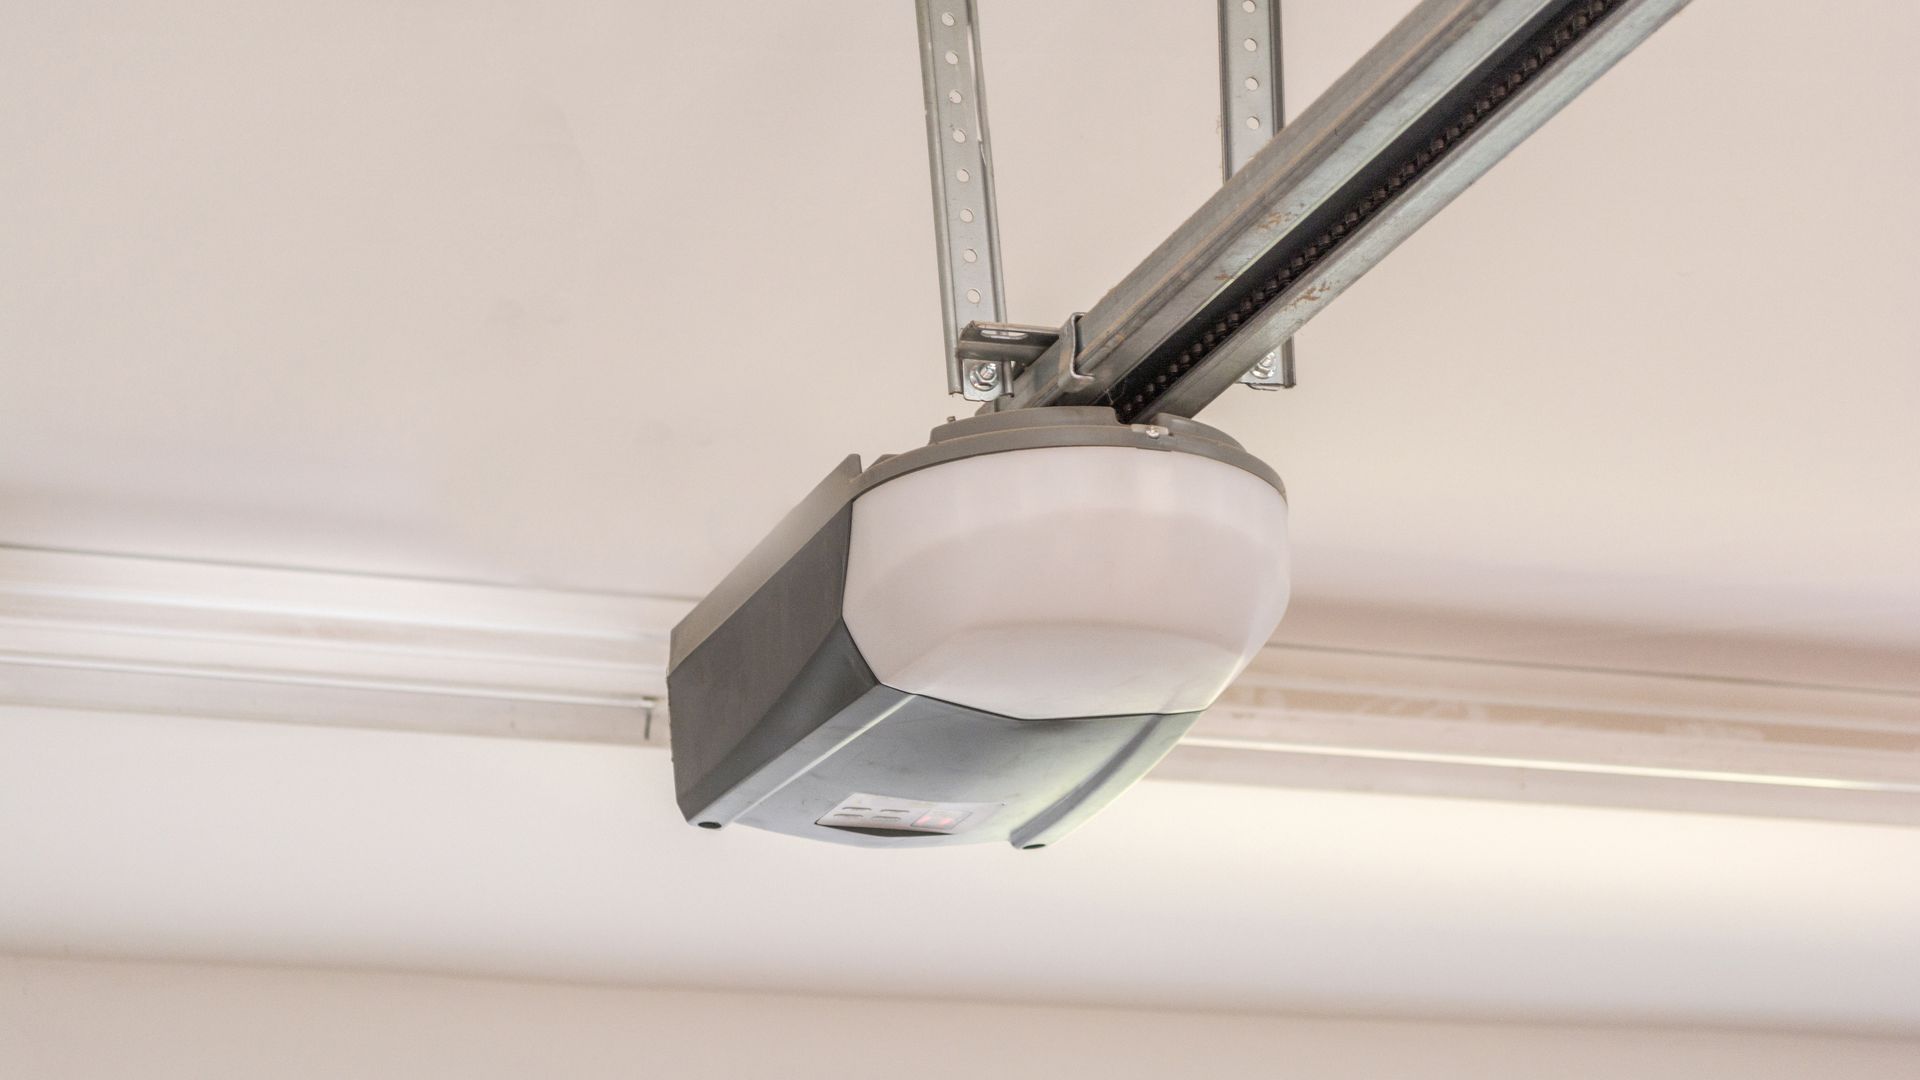 an automatic garage door opener motor mounted on the ceiling.